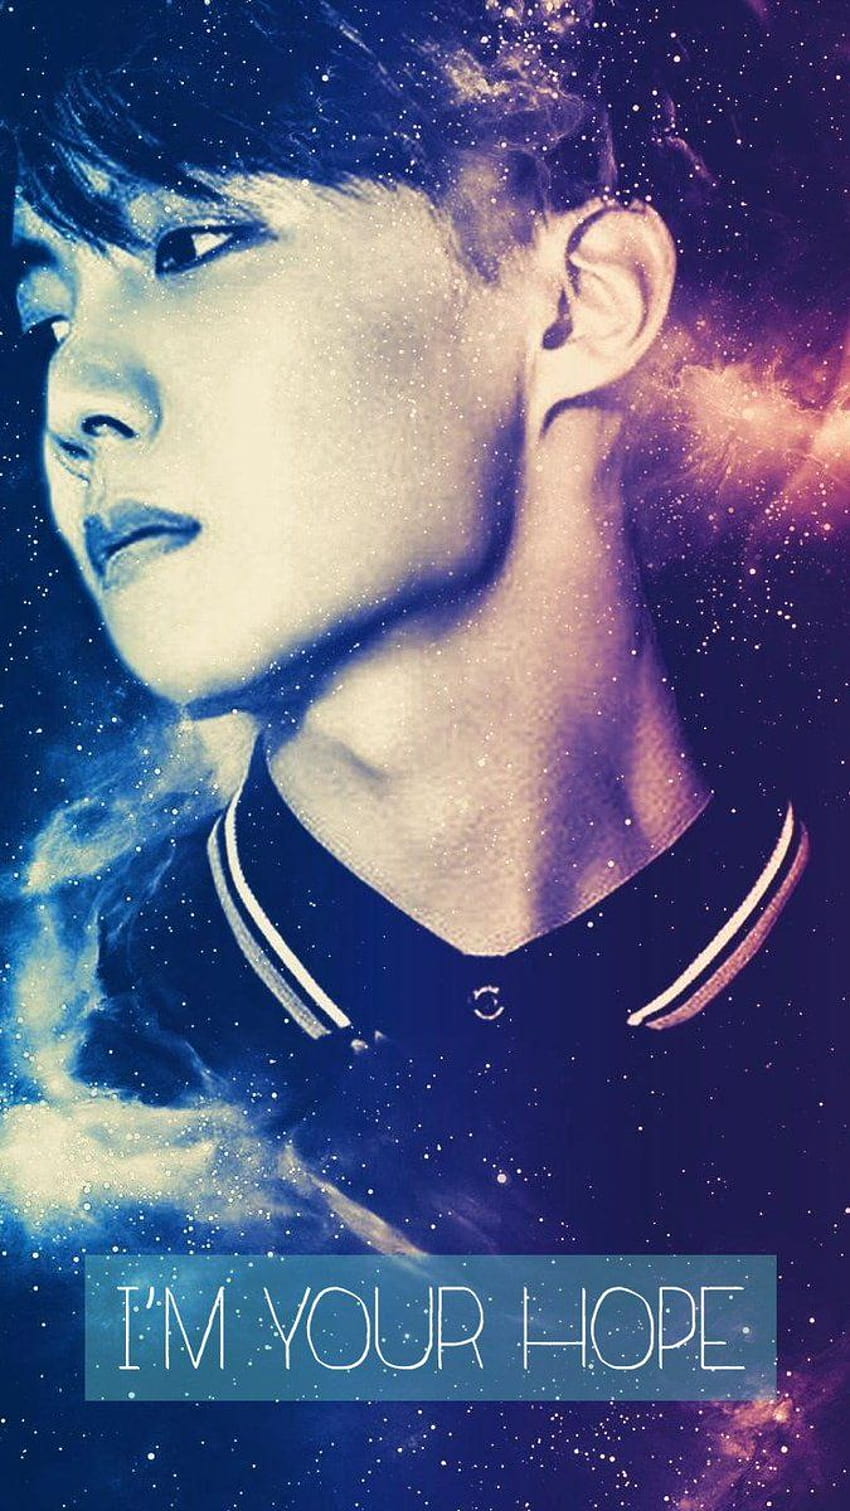 JHOPE] created by me. Make sure to : give credit if you, bts j hope phone HD phone wallpaper